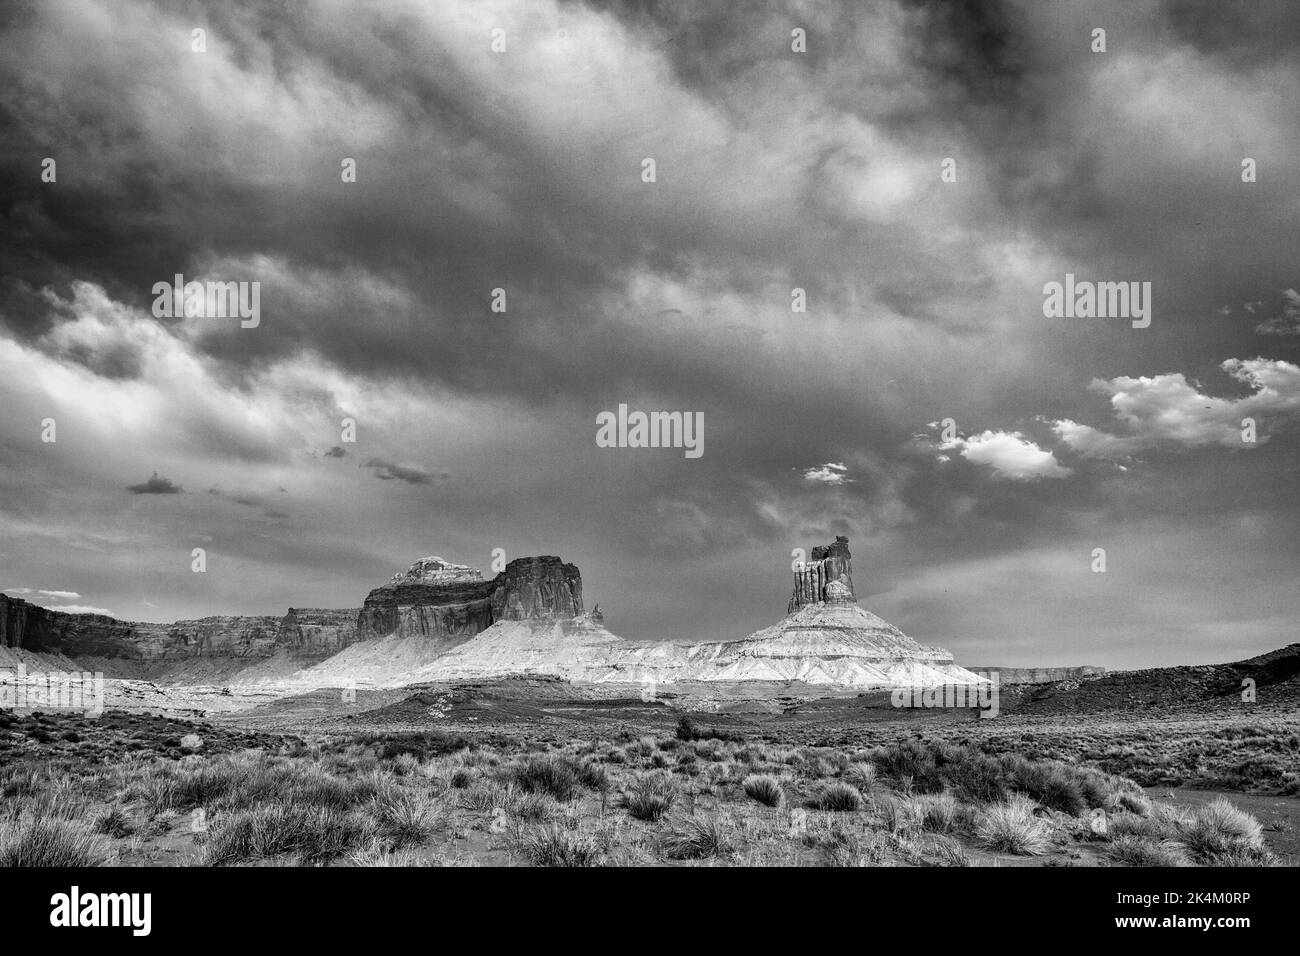 The Candlestick Tower, a Wingate sandstone monolith on the White Rim in Canyonlands National Park, Utah. Stock Photo